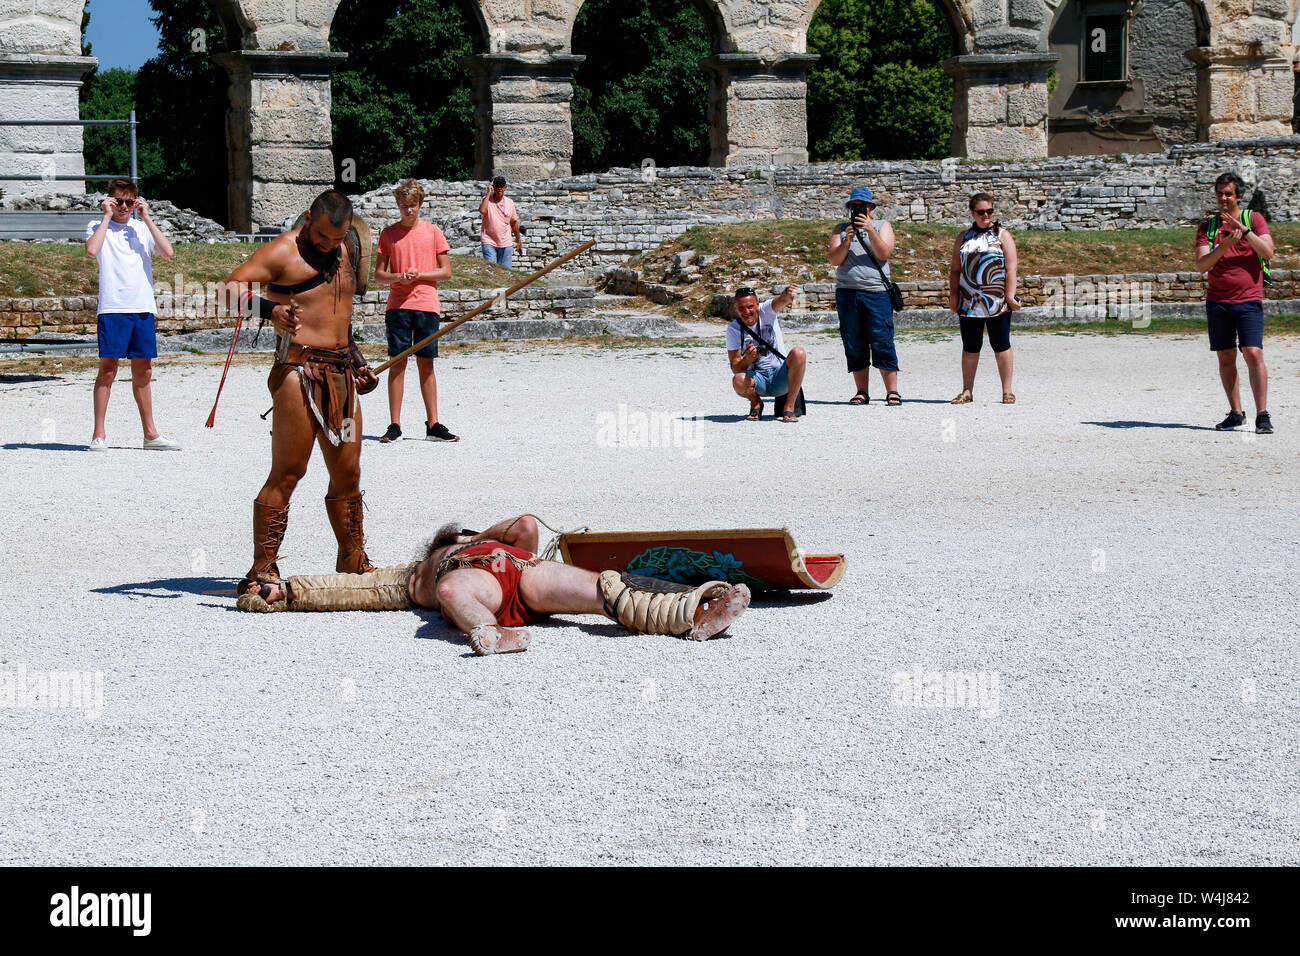 Tourists watch as actors stage gladiator battle in Pula Arena, a Roman amphitheatre built in Croatia in the 1st century AD Stock Photo